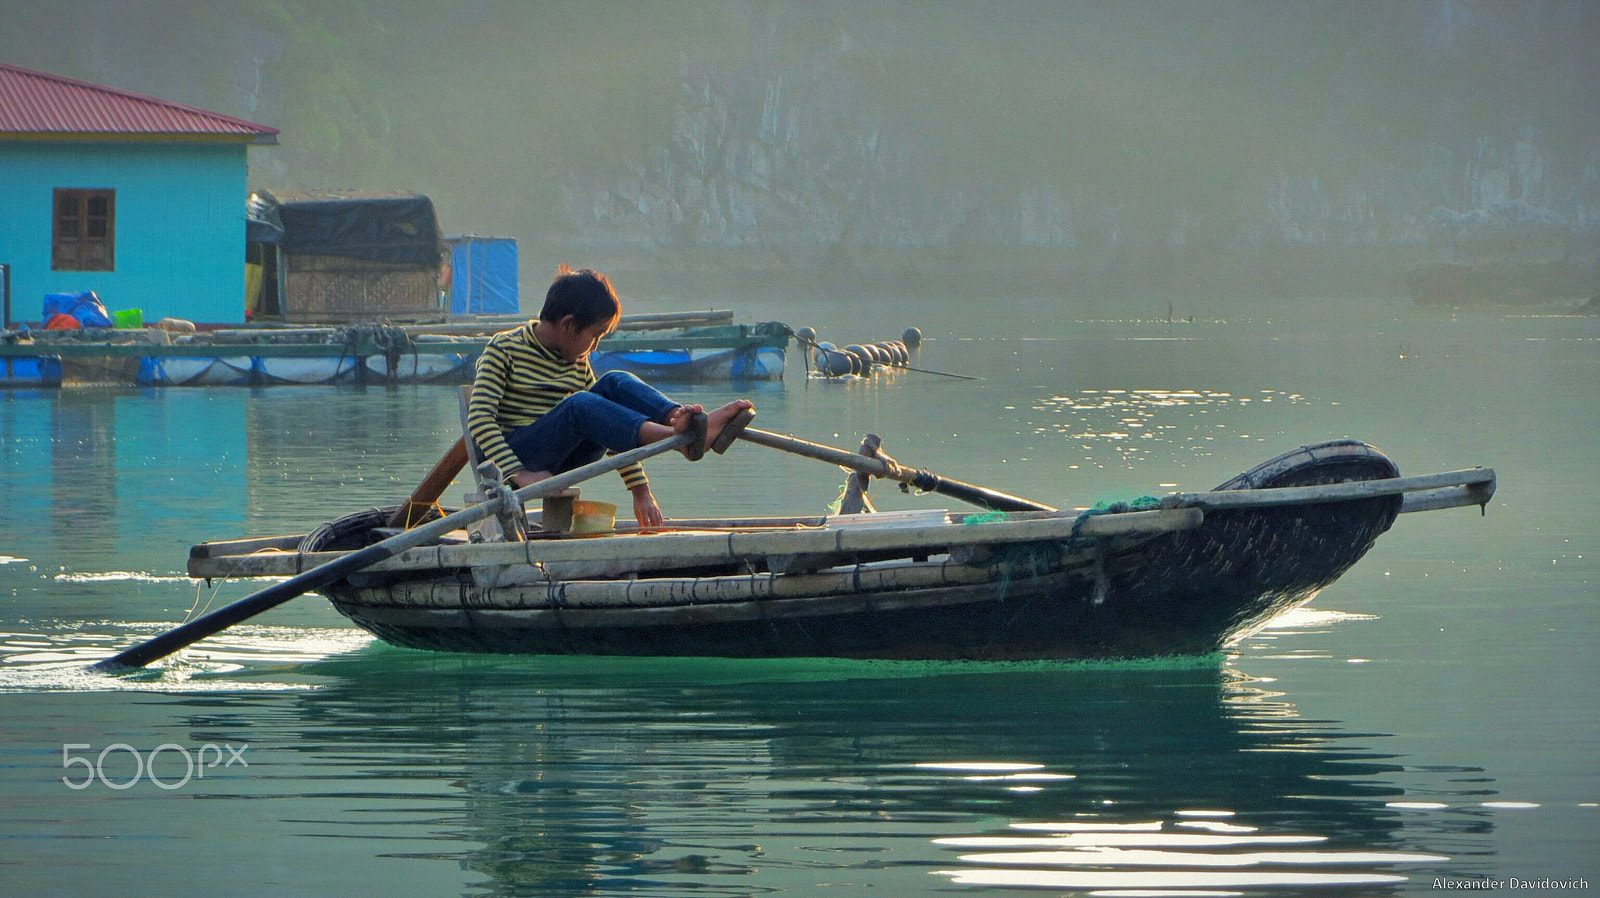 Canon PowerShot ELPH 520 HS (IXUS 500 HS / IXY 3) sample photo. Boy rowing a boat with his feet in vietnam photography